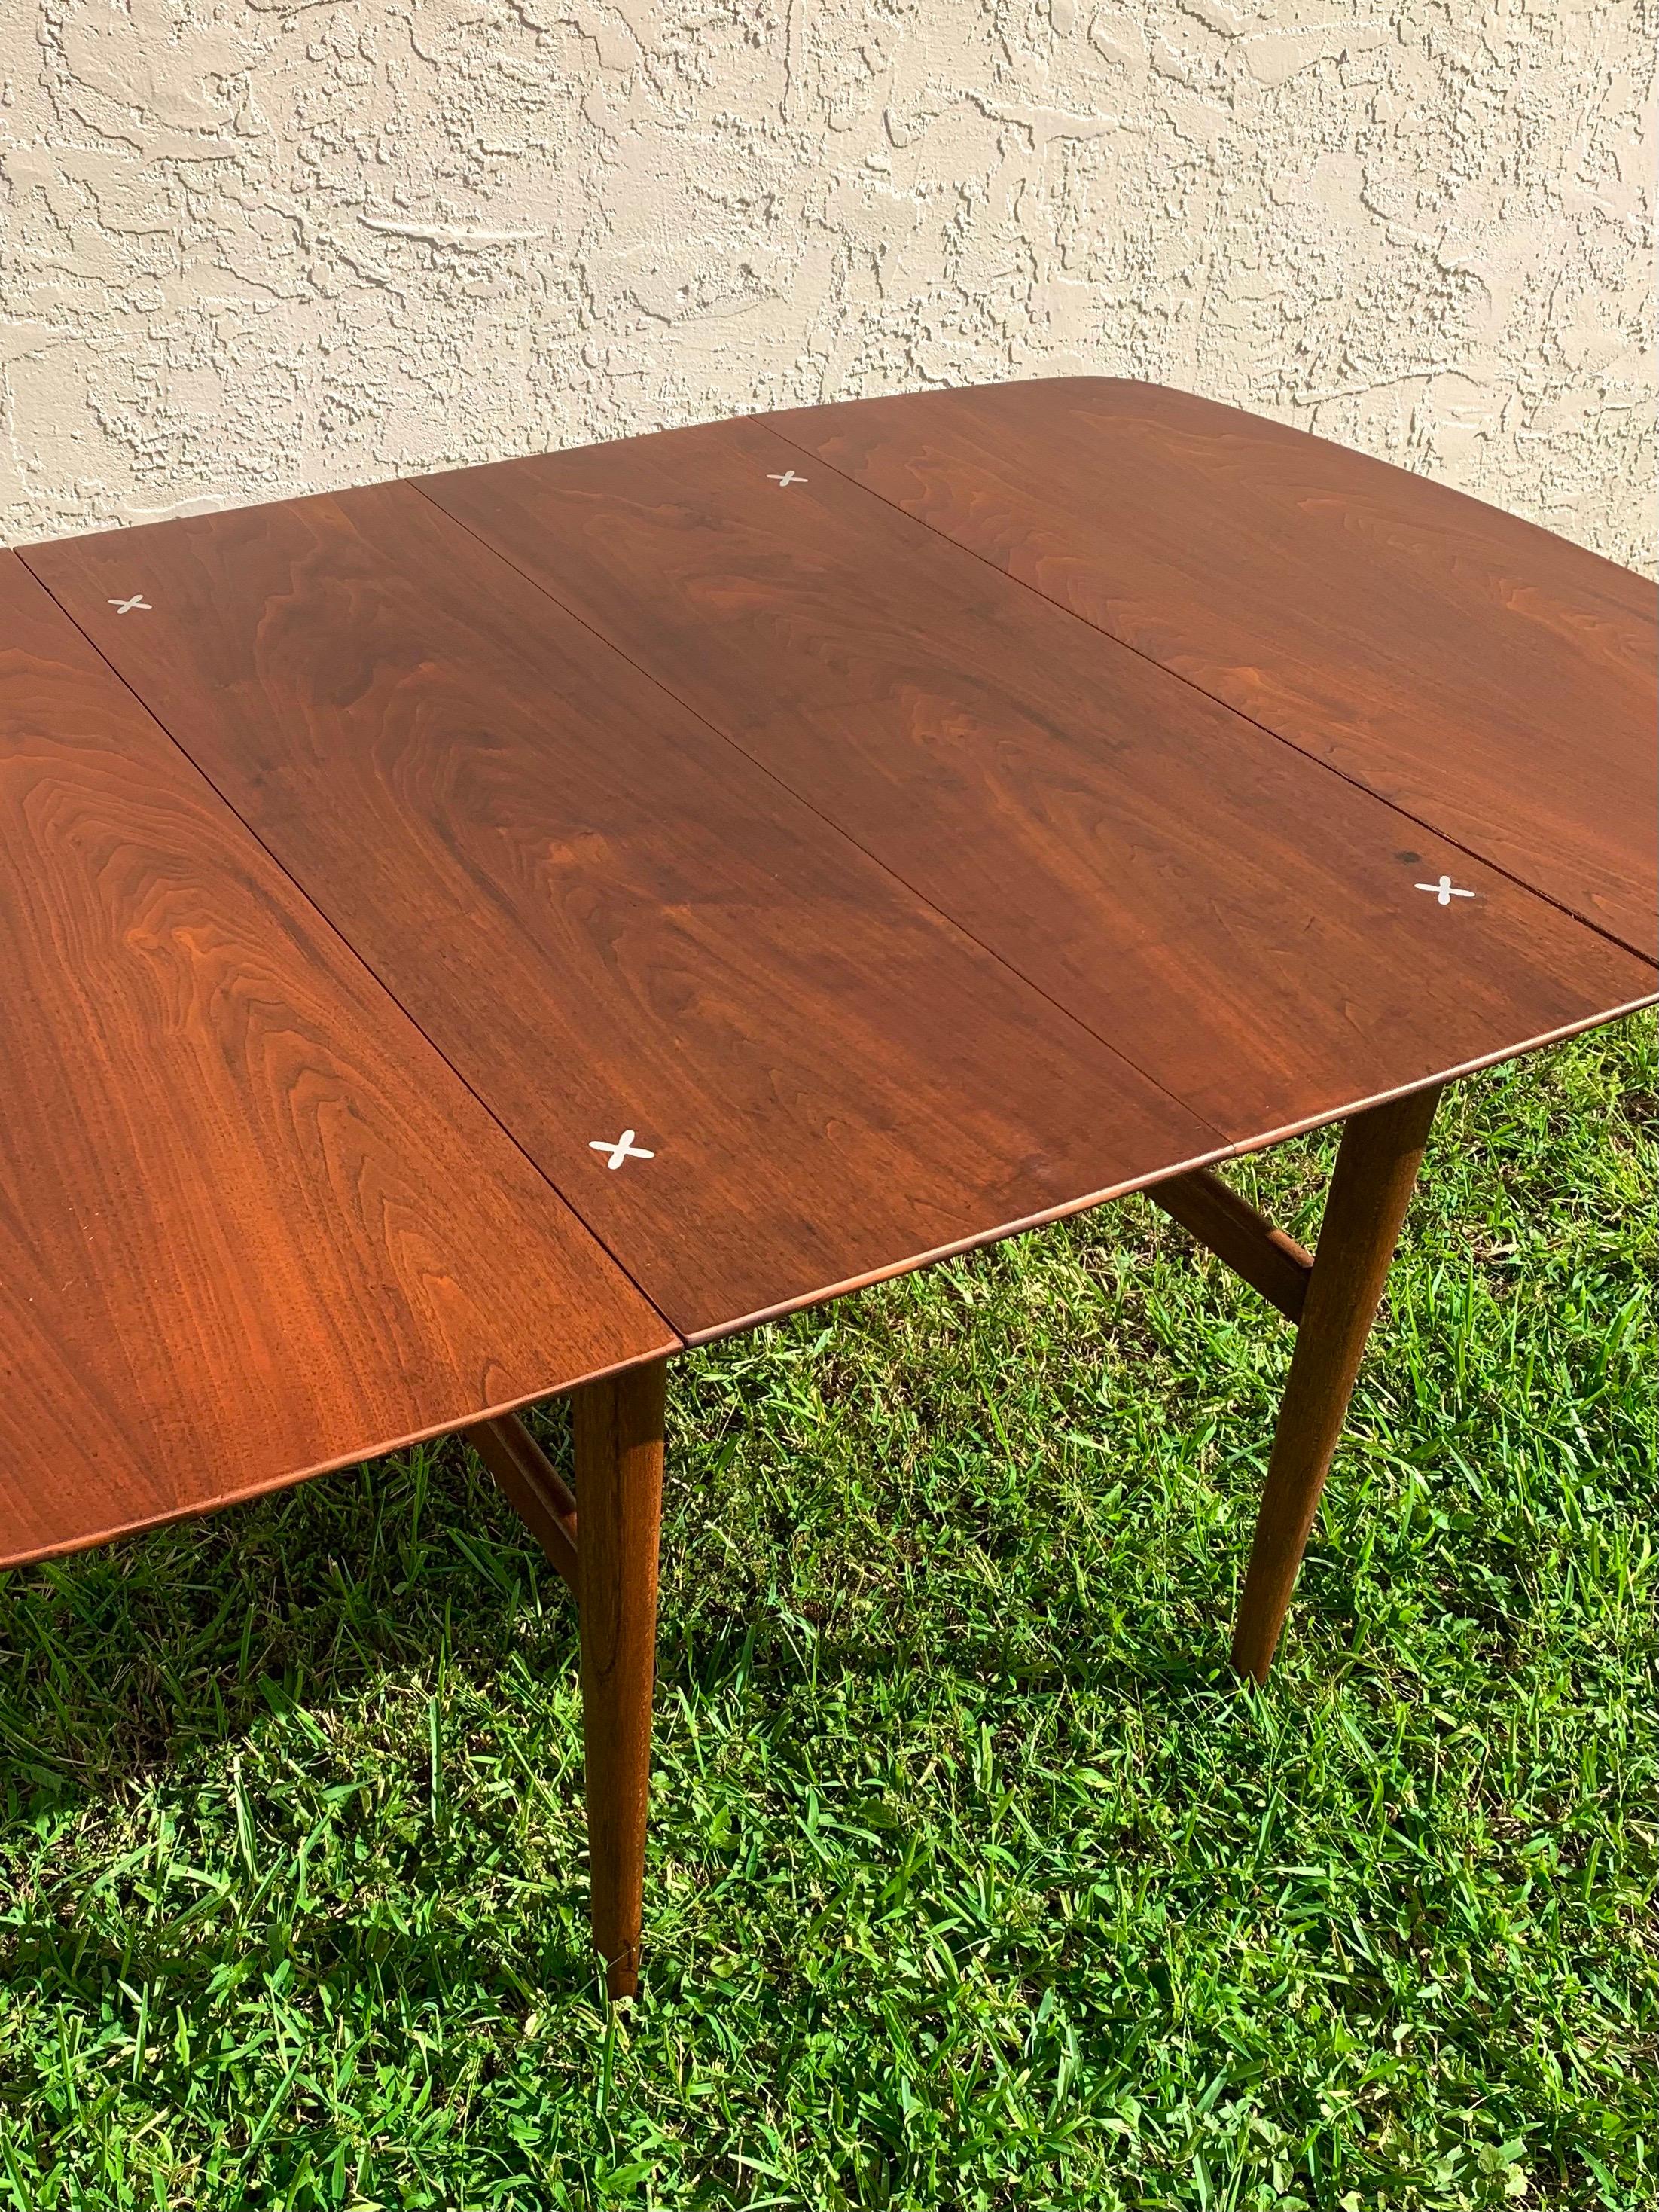 Mid-Century Modern dining table designed by Merton Gershun for American of Martinsville Dania line. Drop leaf design with 2 leaves. Top refinished. Able to go from a 25” table top to an 85” table top to fit all dining needs. 

7.5/10 condition due